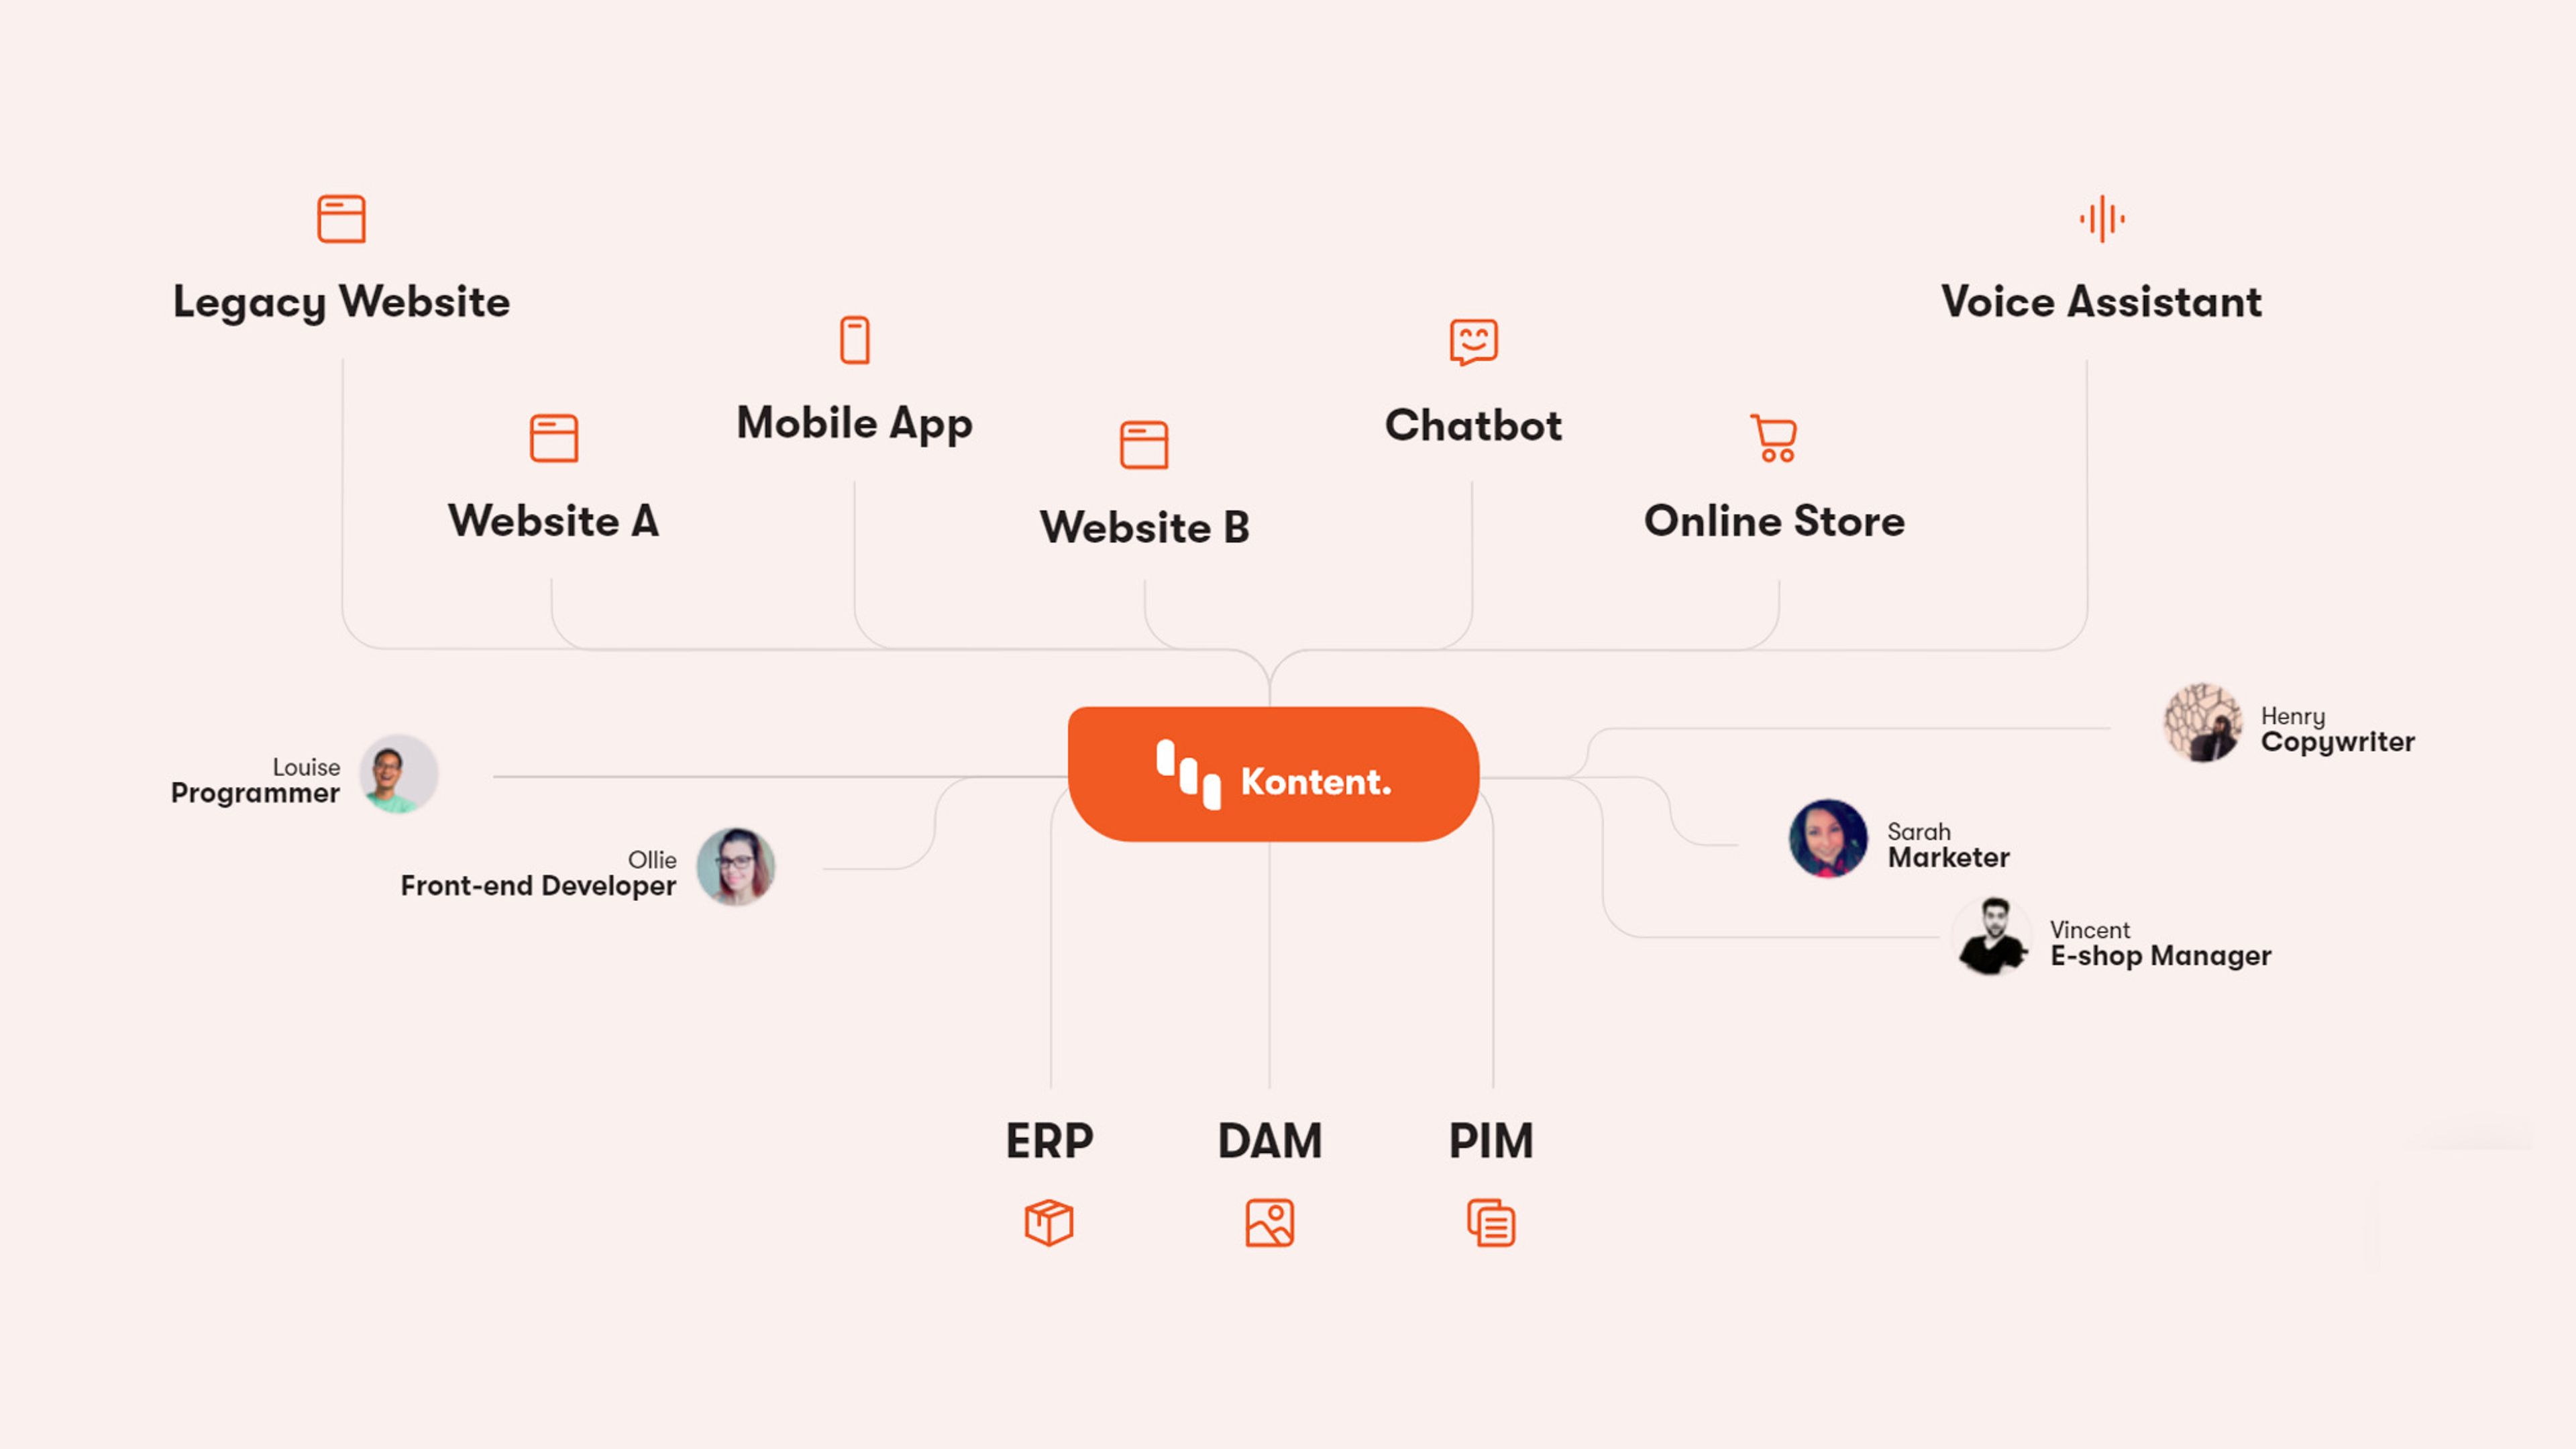 Kontent by Kentico featured image of schema, a workflow diagram with small icons